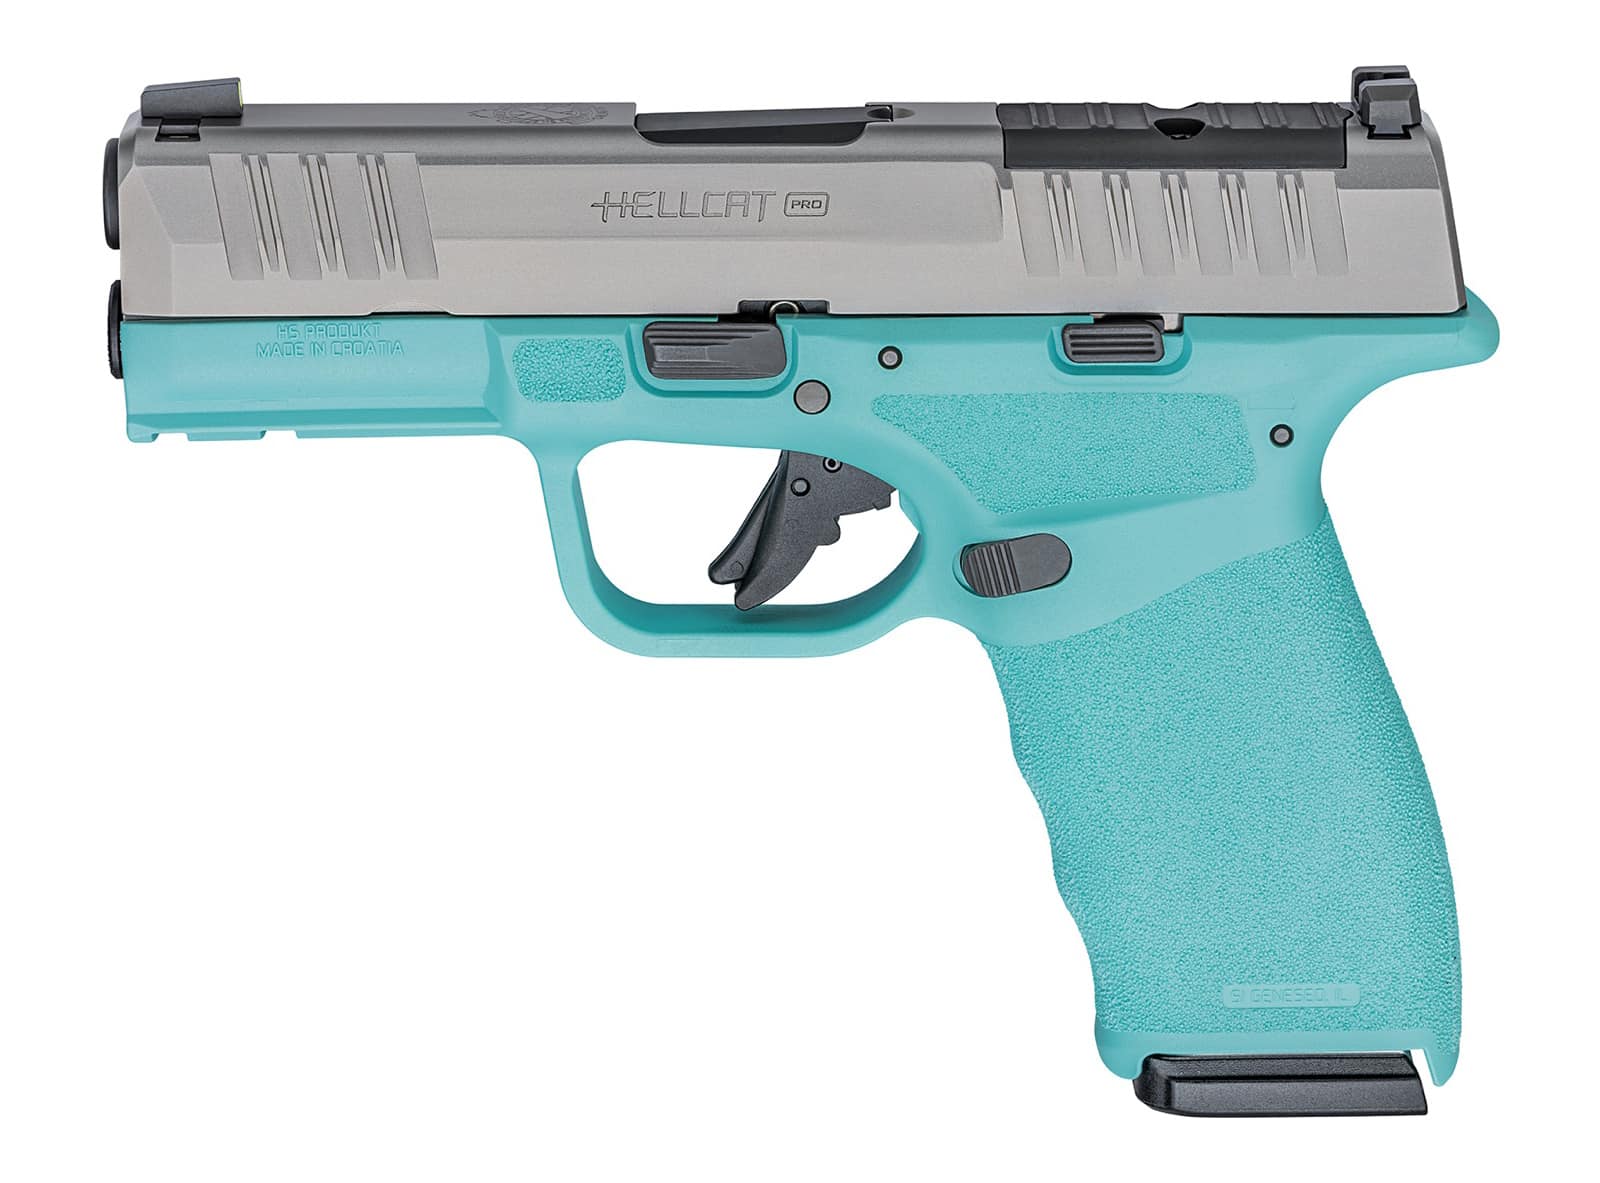 Another limited edition model is this Hellcat Pro with Robins Egg Blue finish. It is exclusive to the firearms distributor Davidson's.